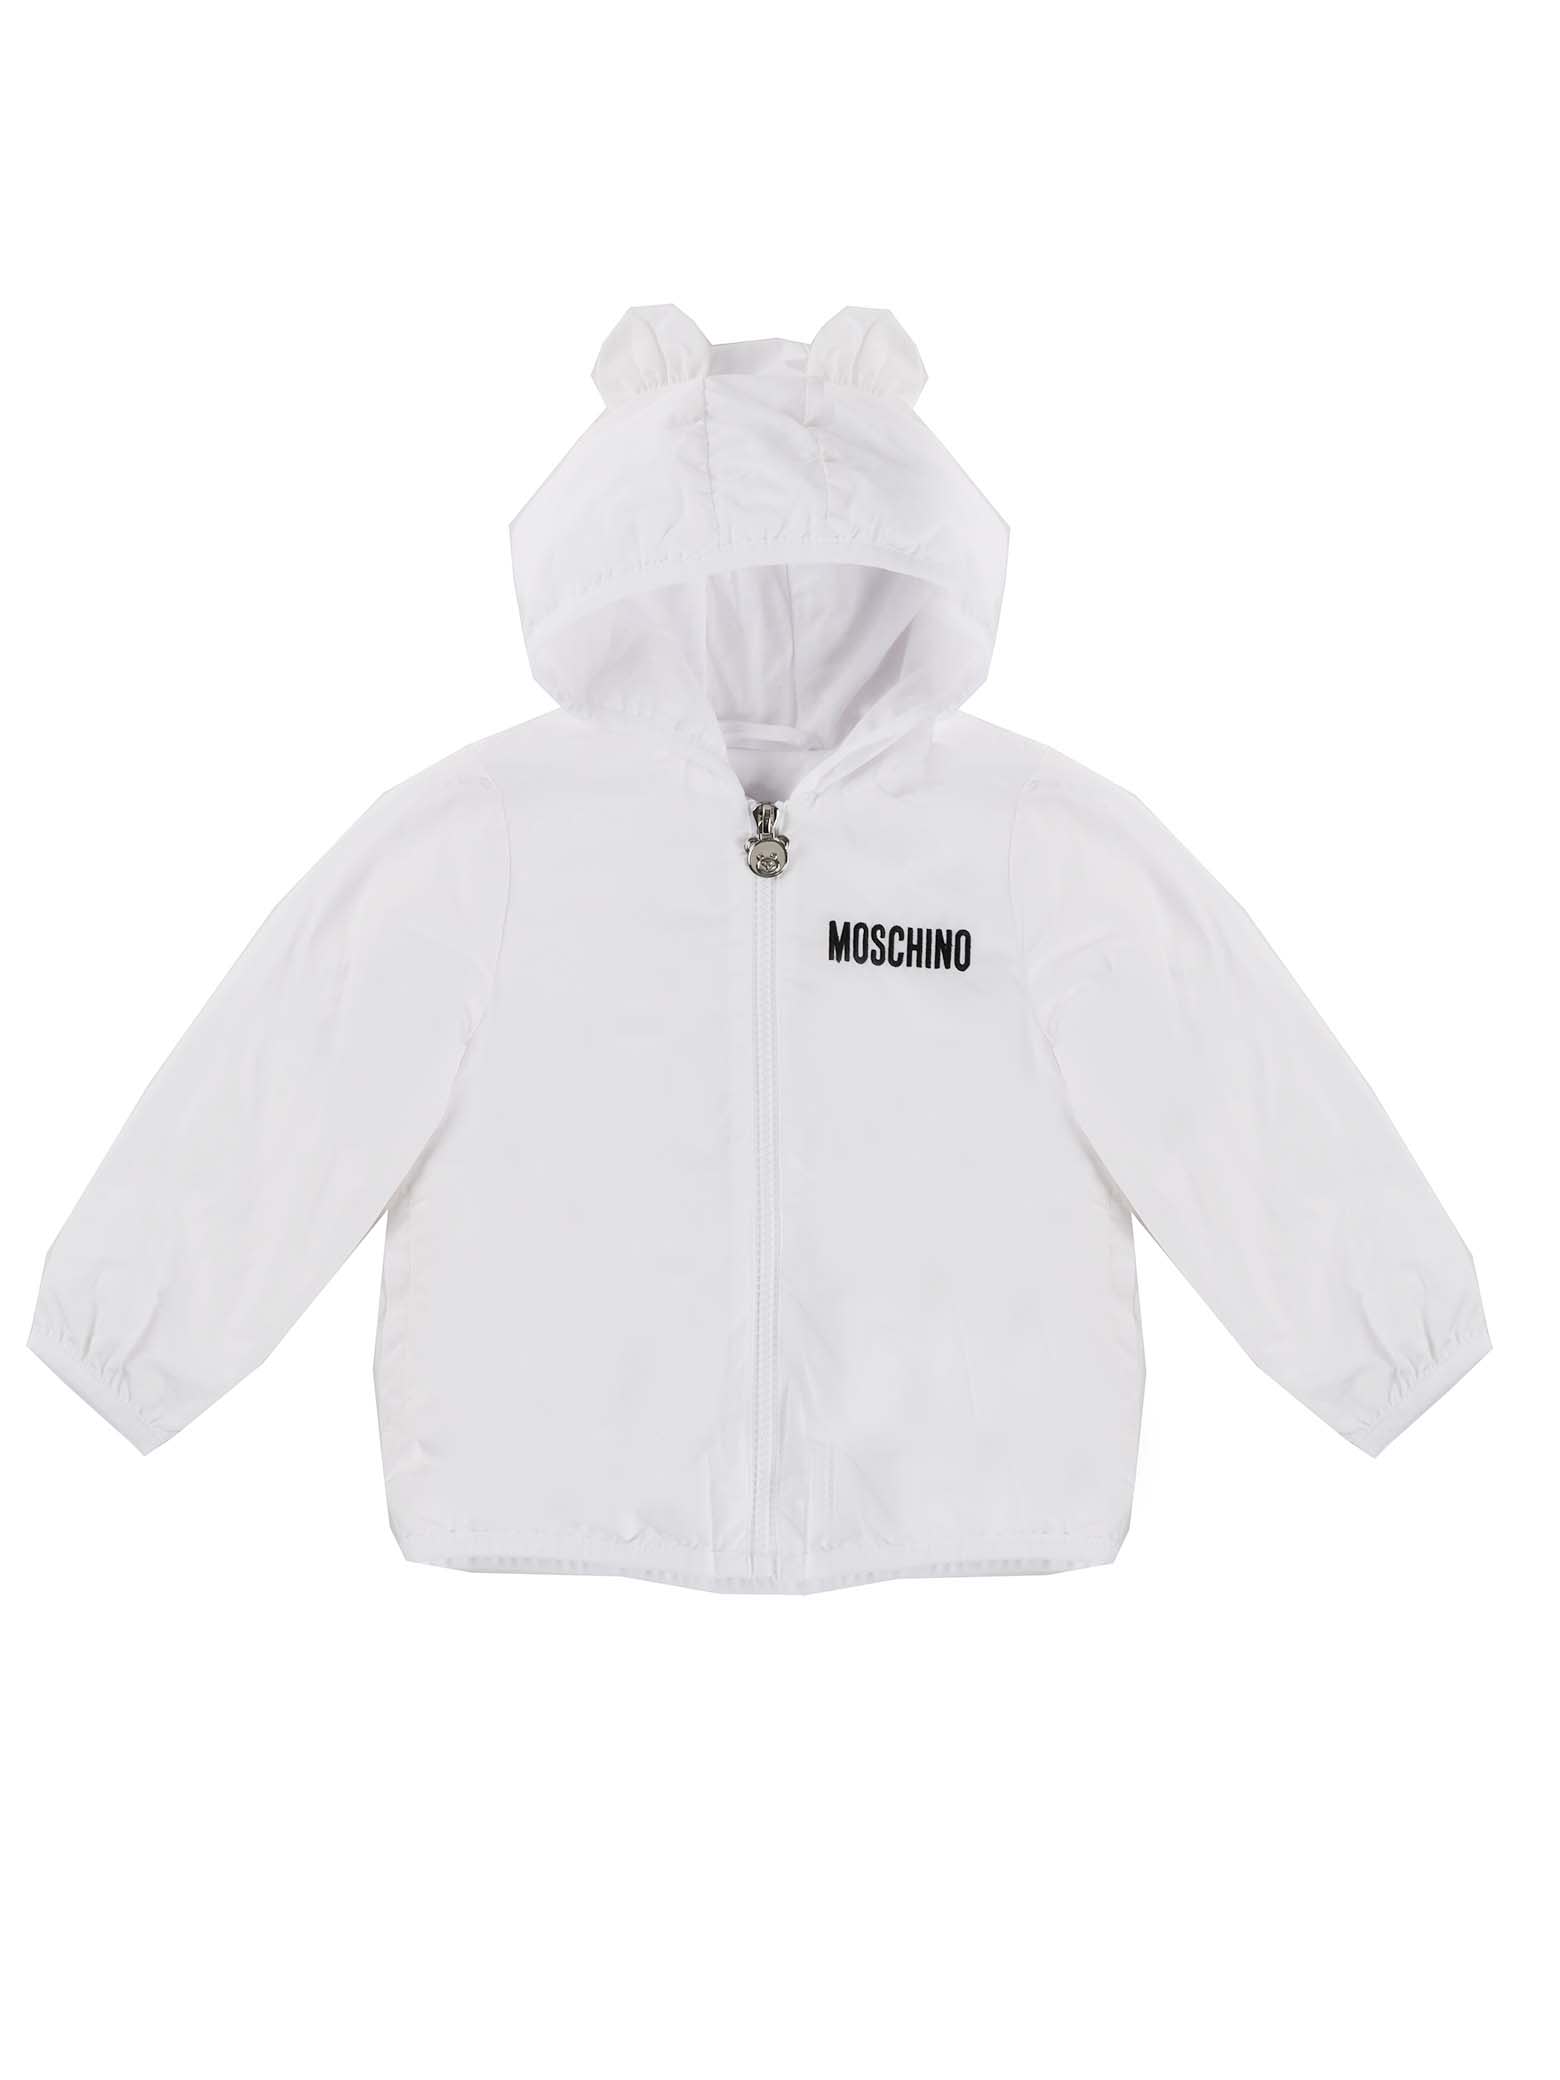 Moschino White Jacket With Hood And Jersey